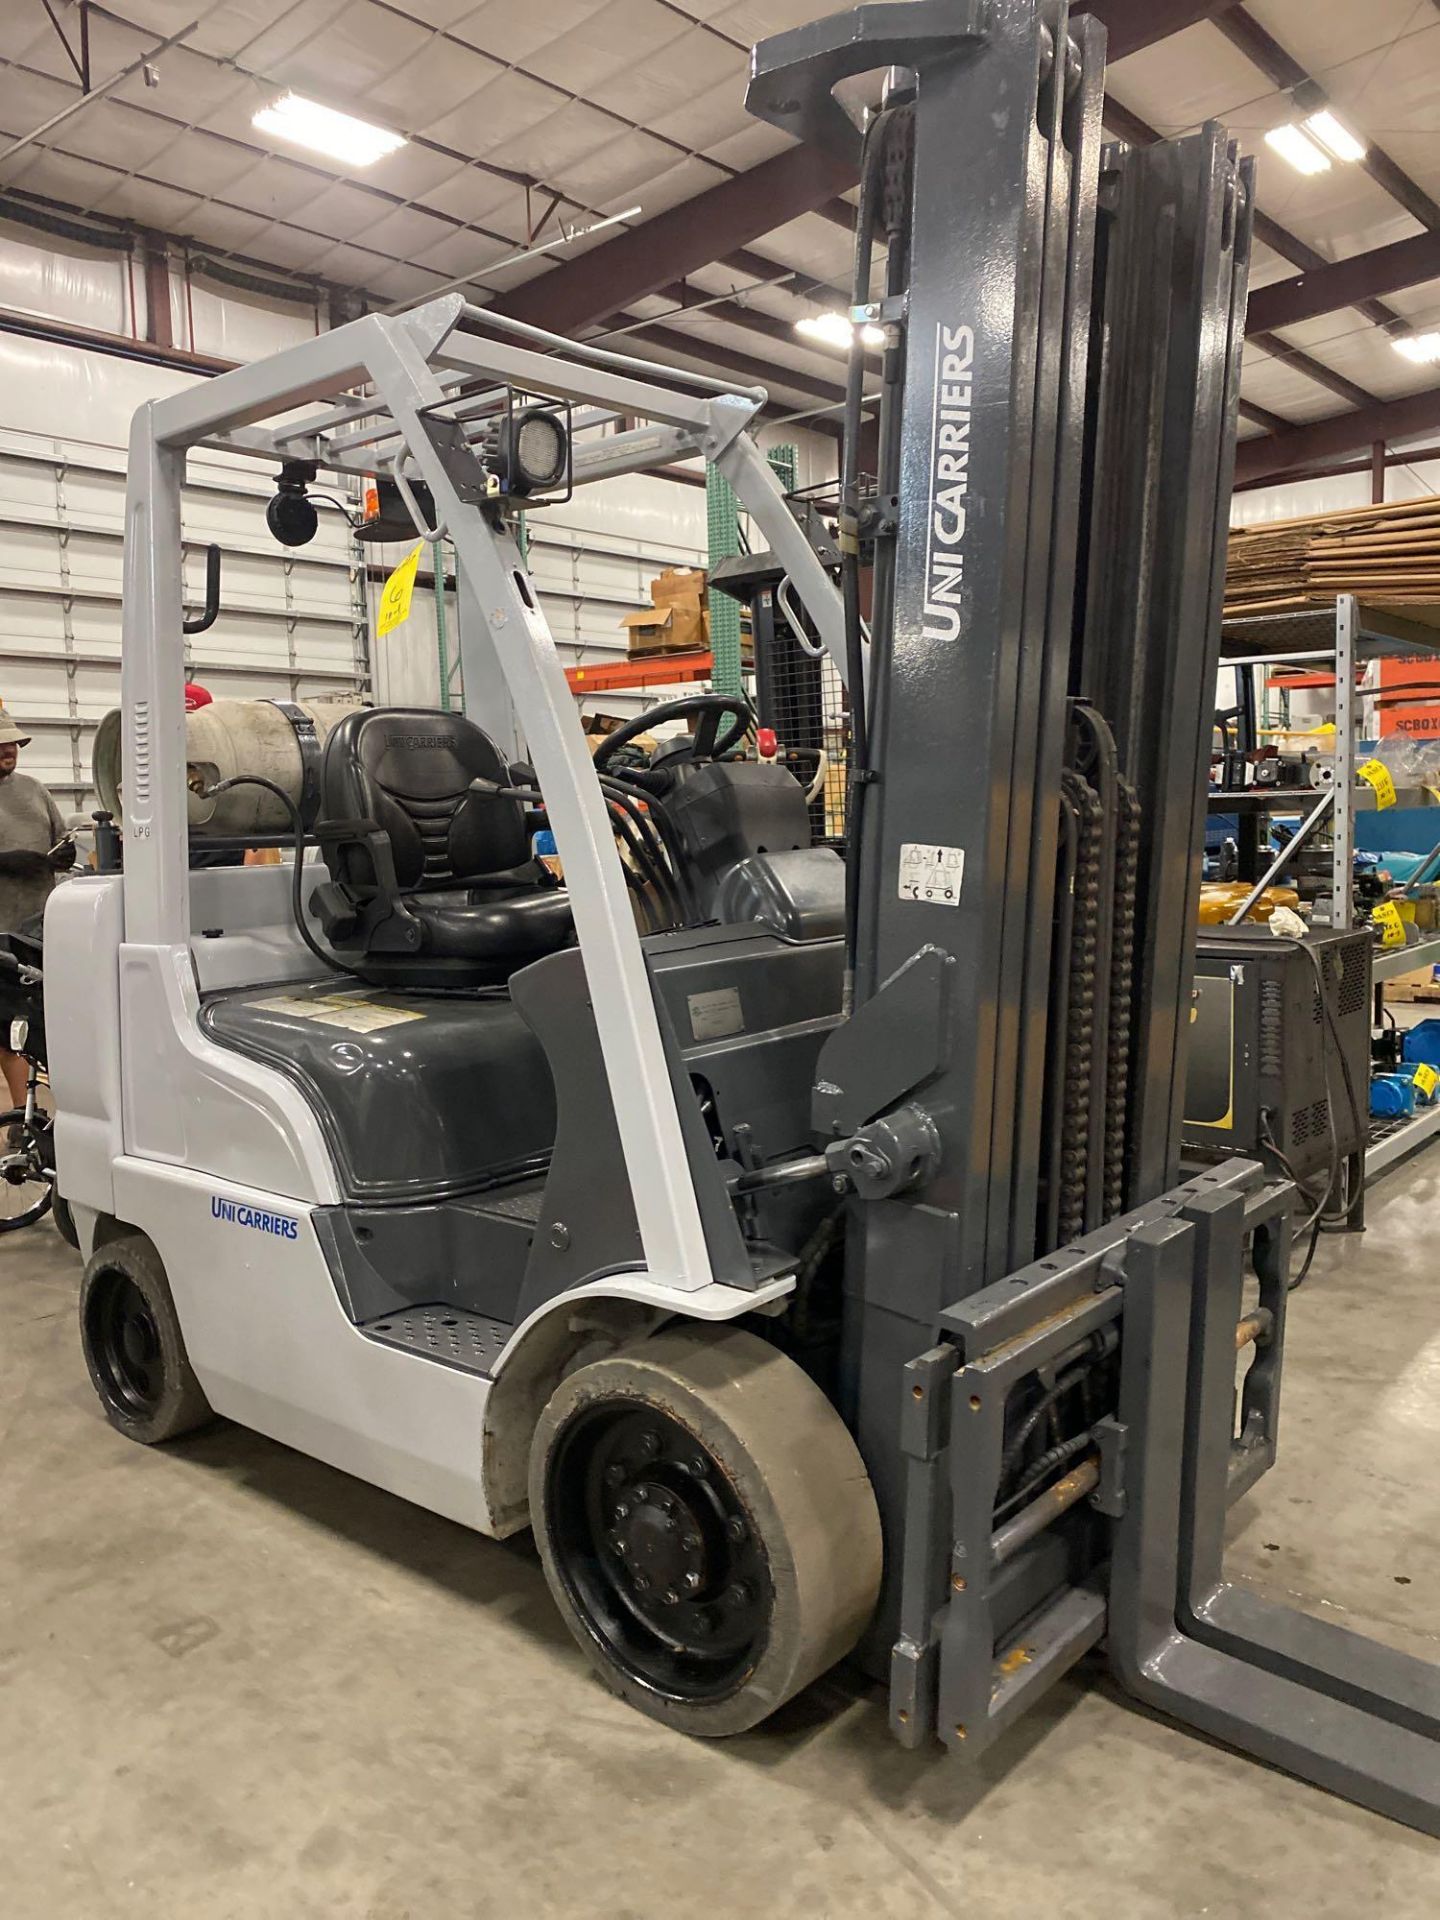 2014 UNICARRIERS LP FORKLIFT MODEL MCUG1F2F30LV, APPROX. 6,000 LB CAPACITY - Image 6 of 10